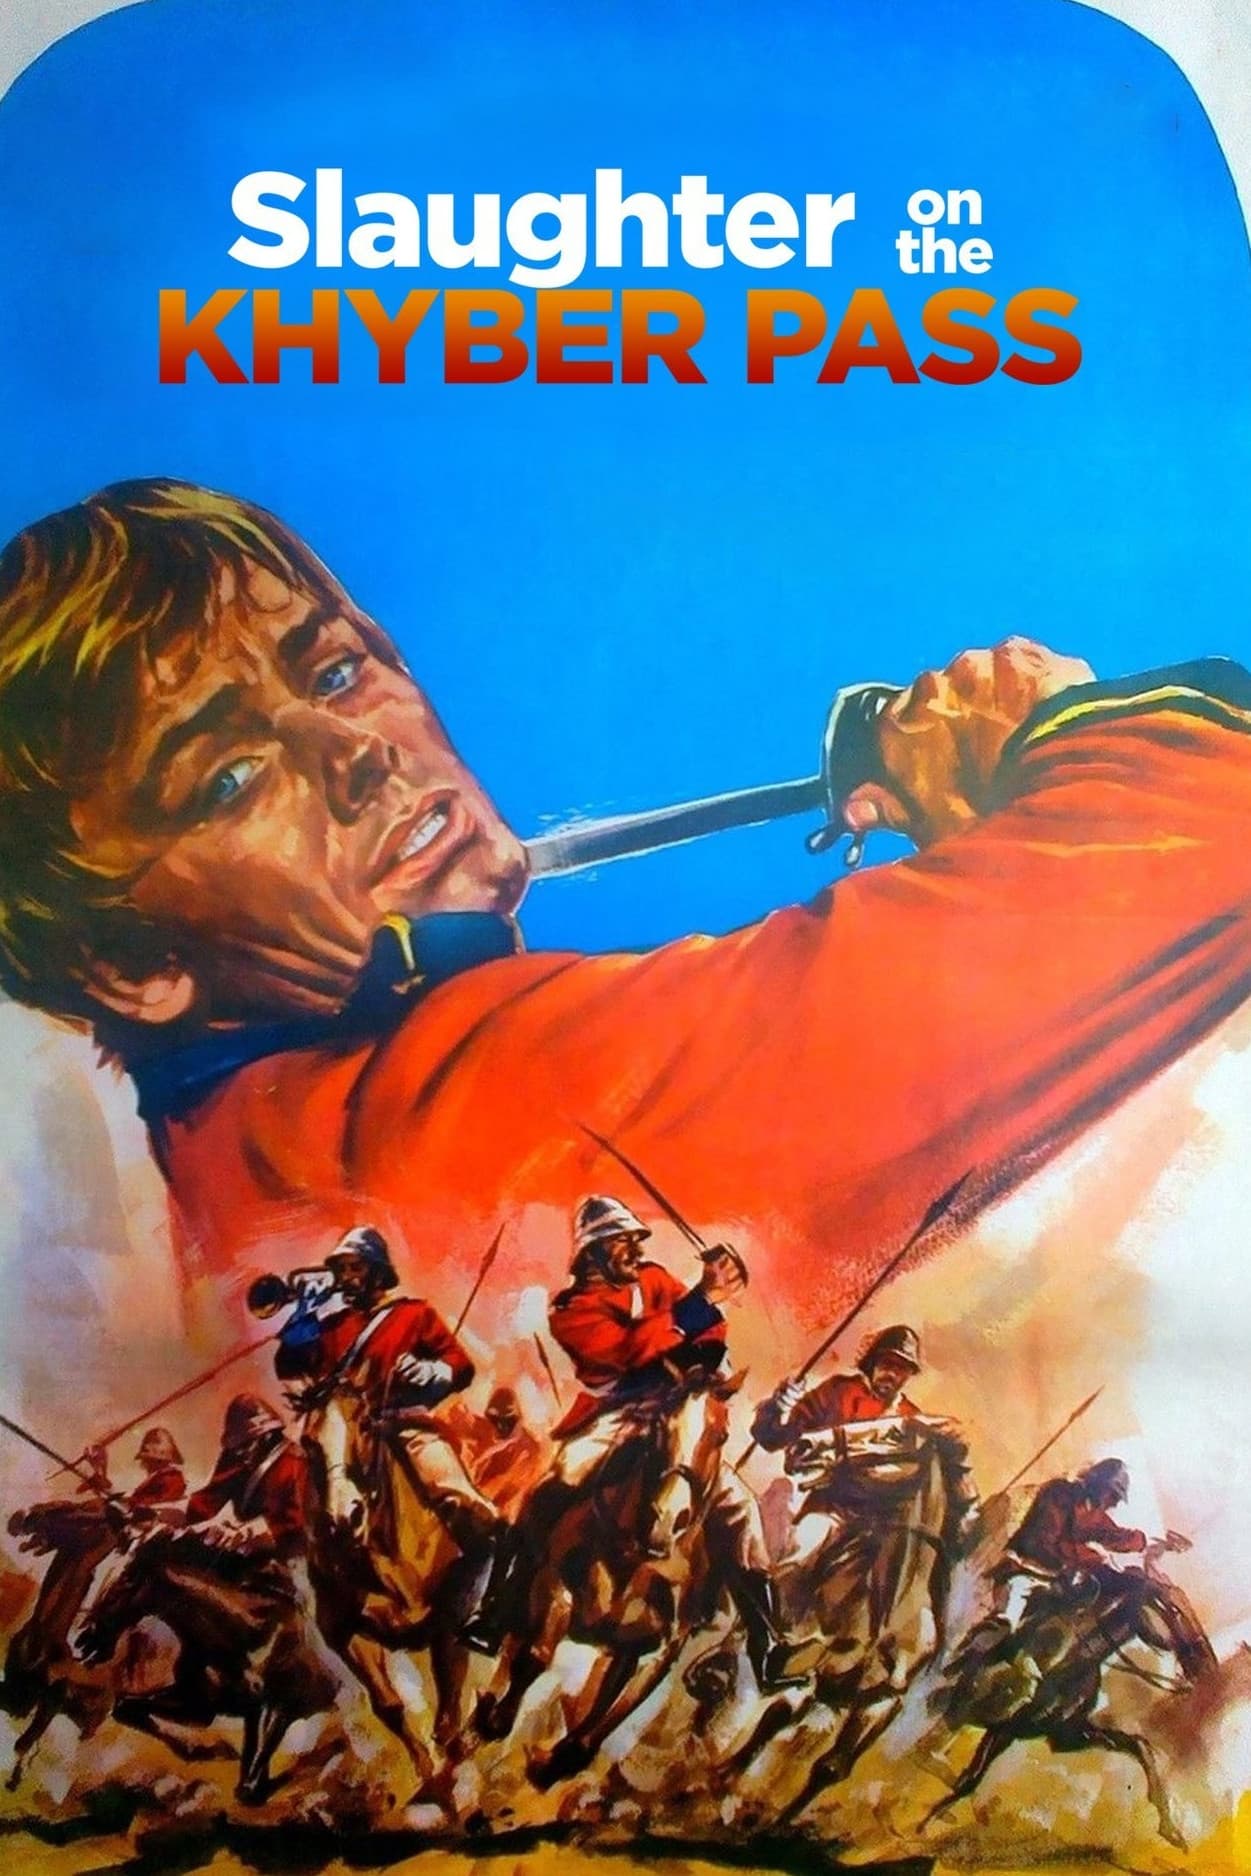 Slaughter on the Khyber Pass